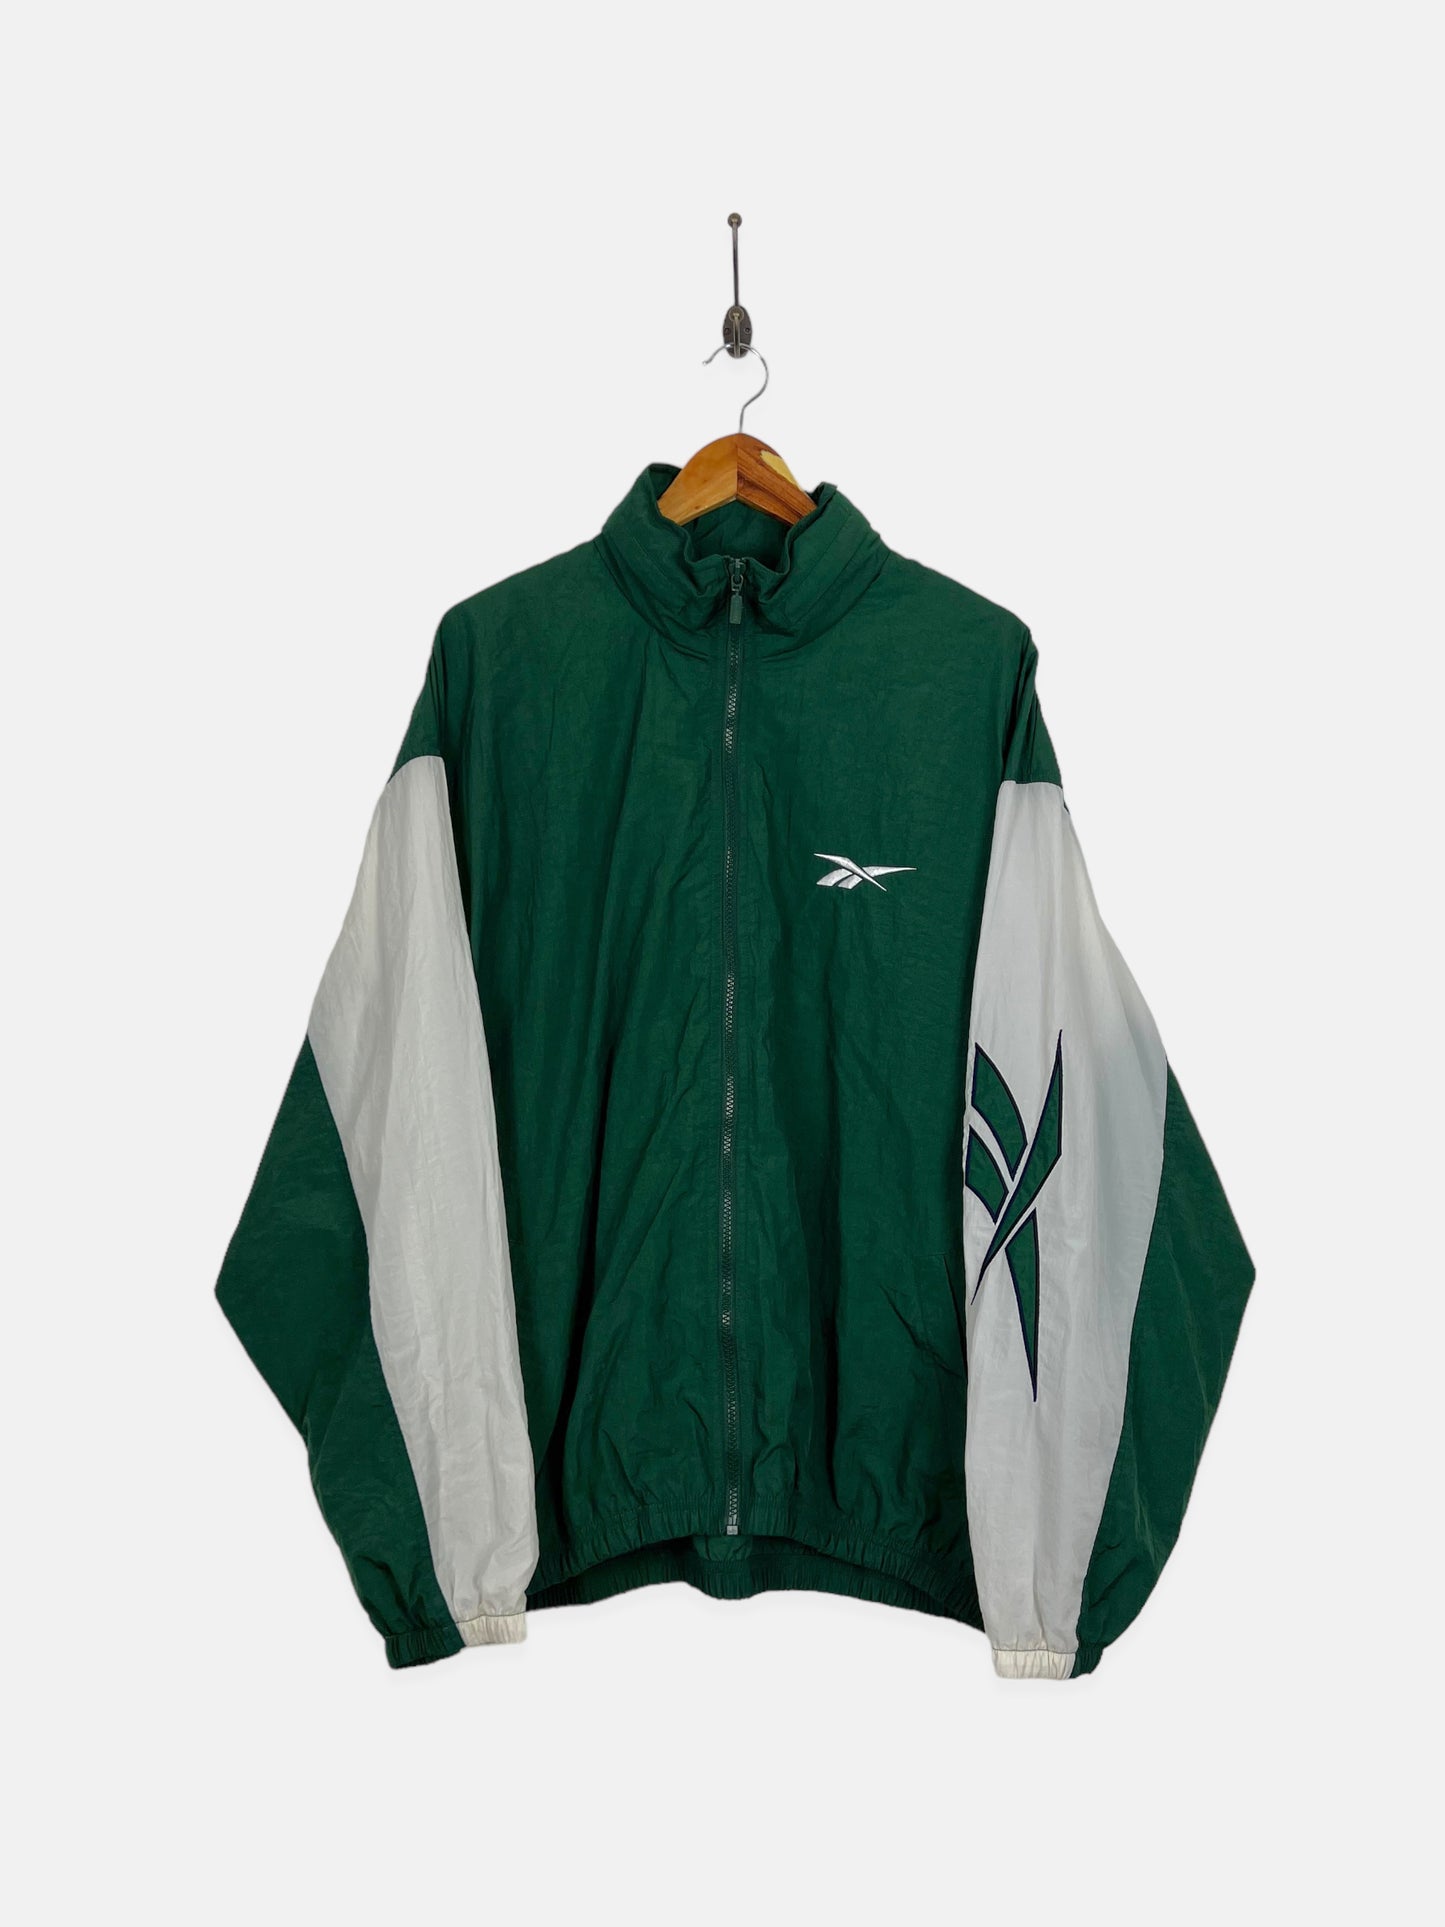 90's Reebok Embroidered Windbreaker with Hood Size L-XL